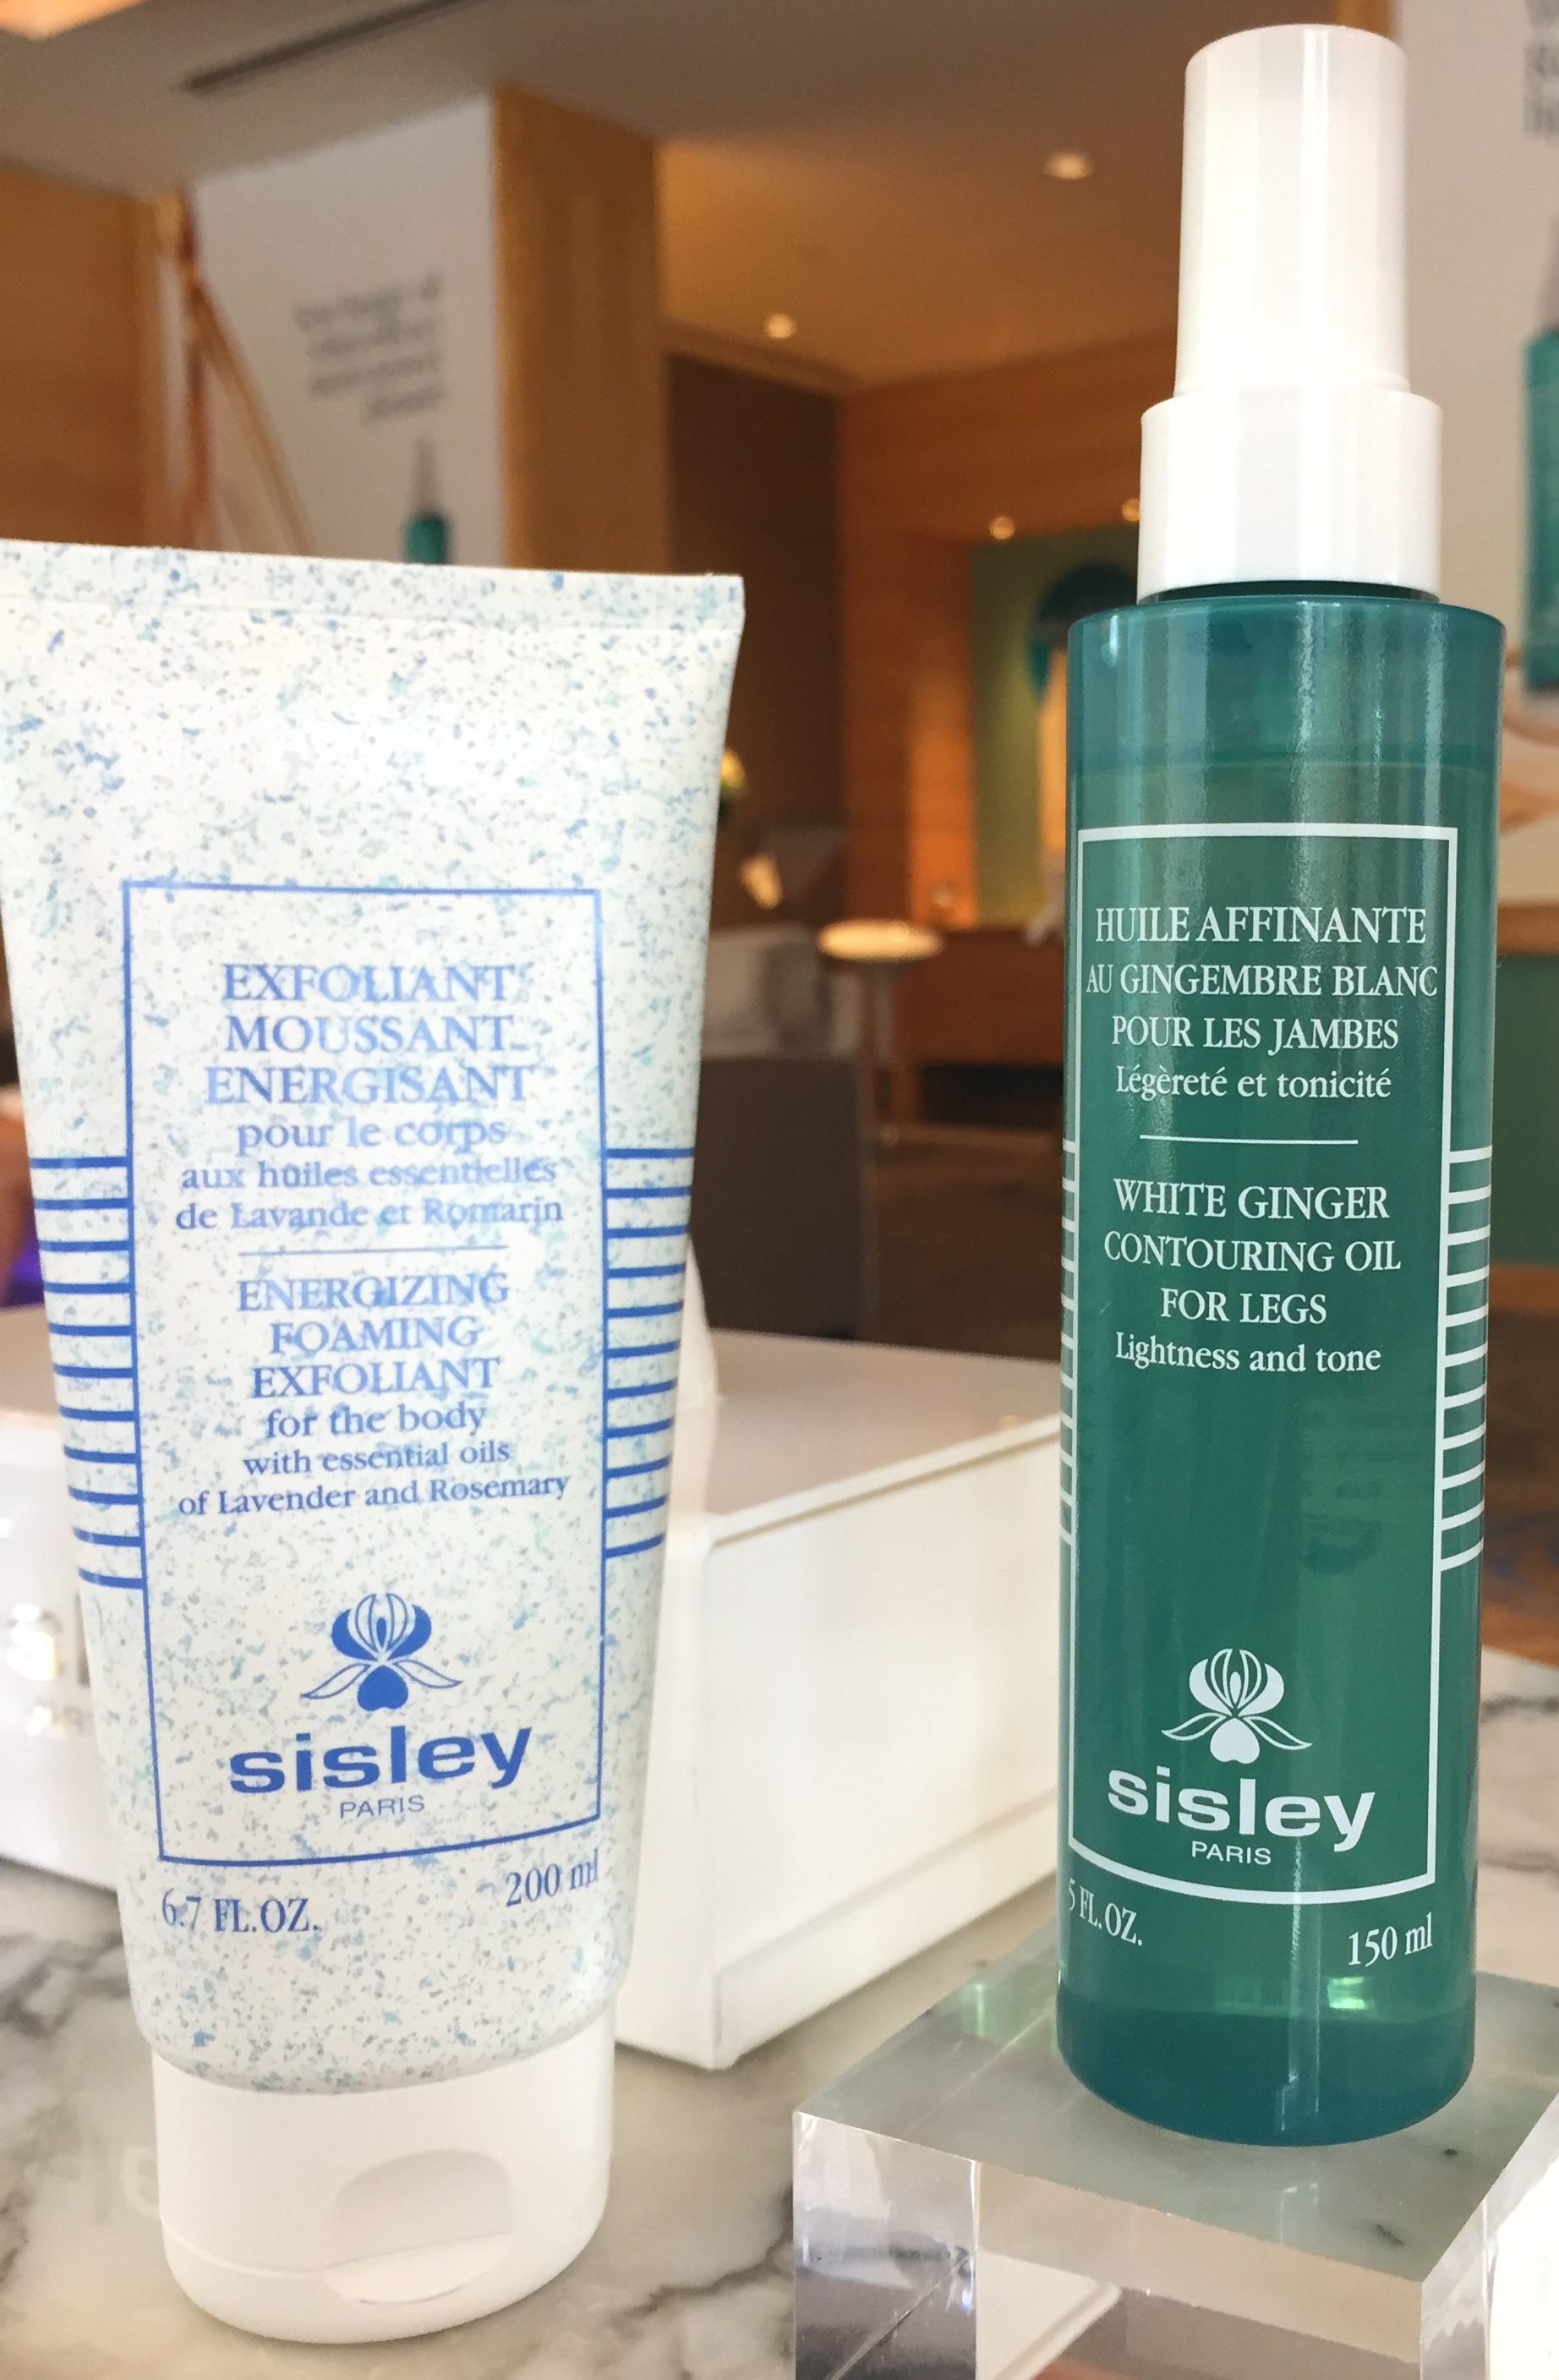 Sisley Energizing Foaming Exfoliant and White Ginger Contouring Oil For Legs-Pamper.my